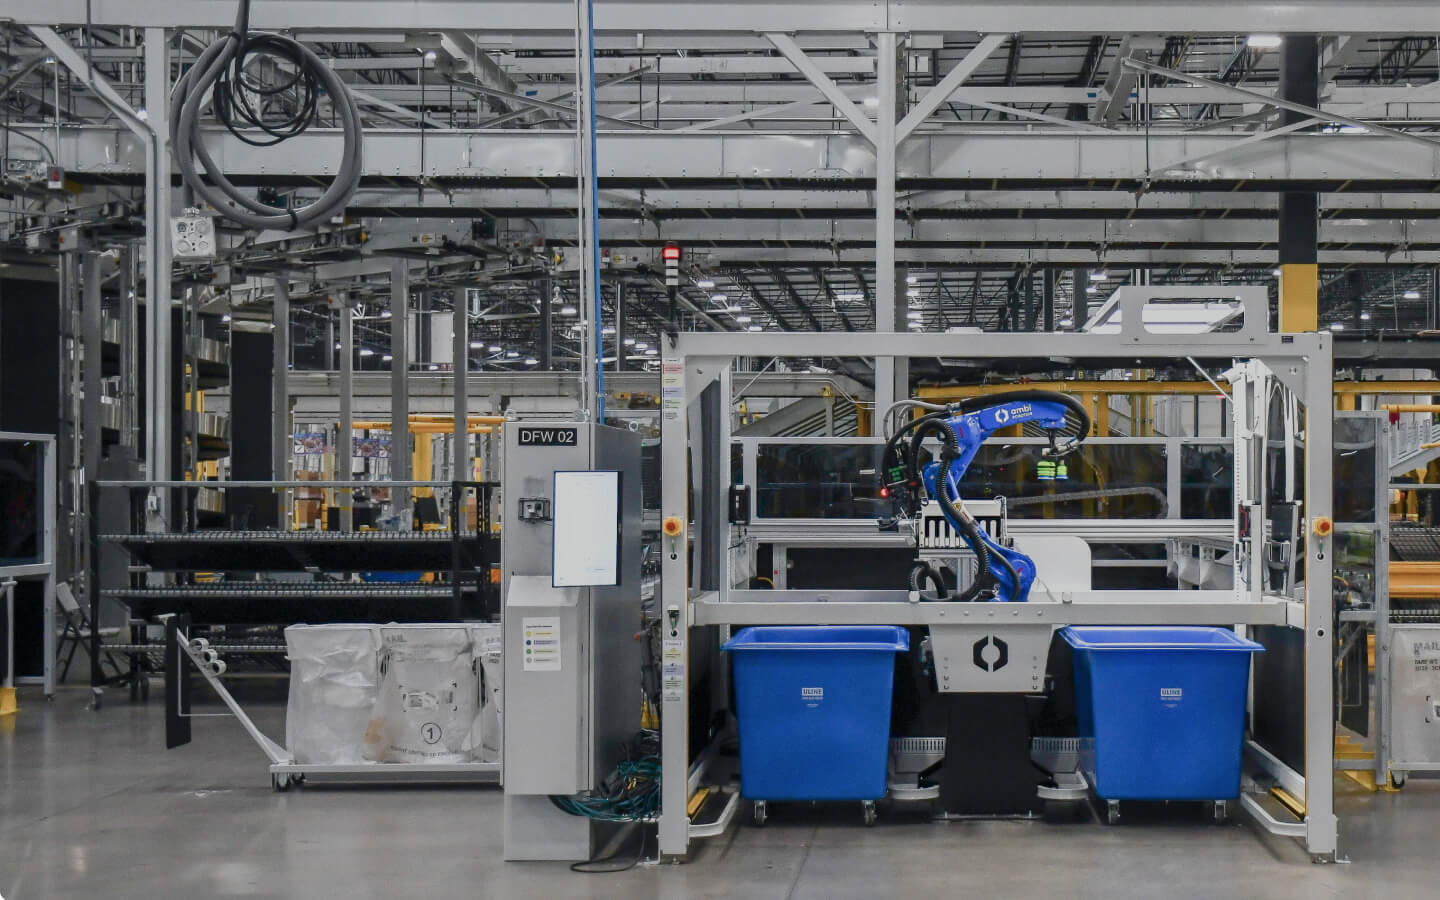 Robots-as-a-Service, RaaS pricing for AI-powered robotic parcel sorting systems. Fastest warehouse robots with faster ROI.